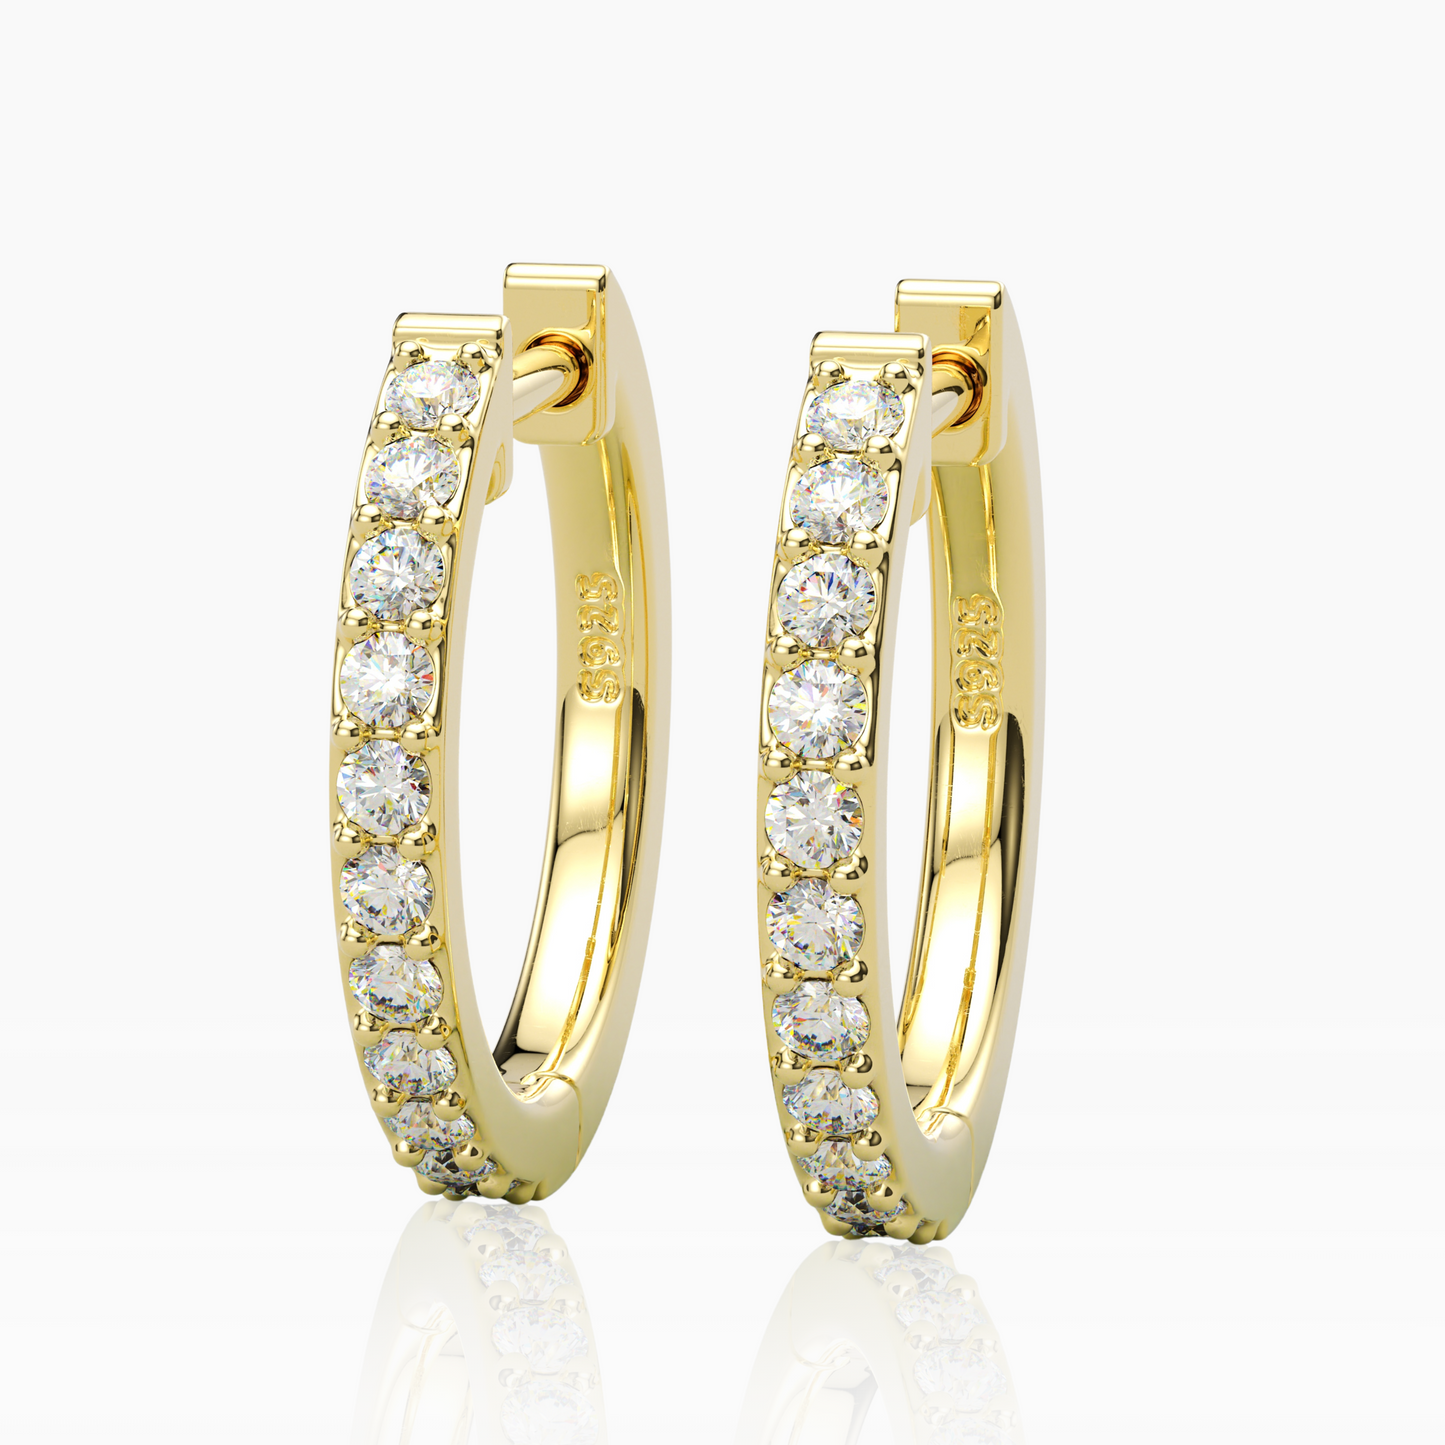 Pave Round Small 16mm Hoop Earrings | 1.5mm